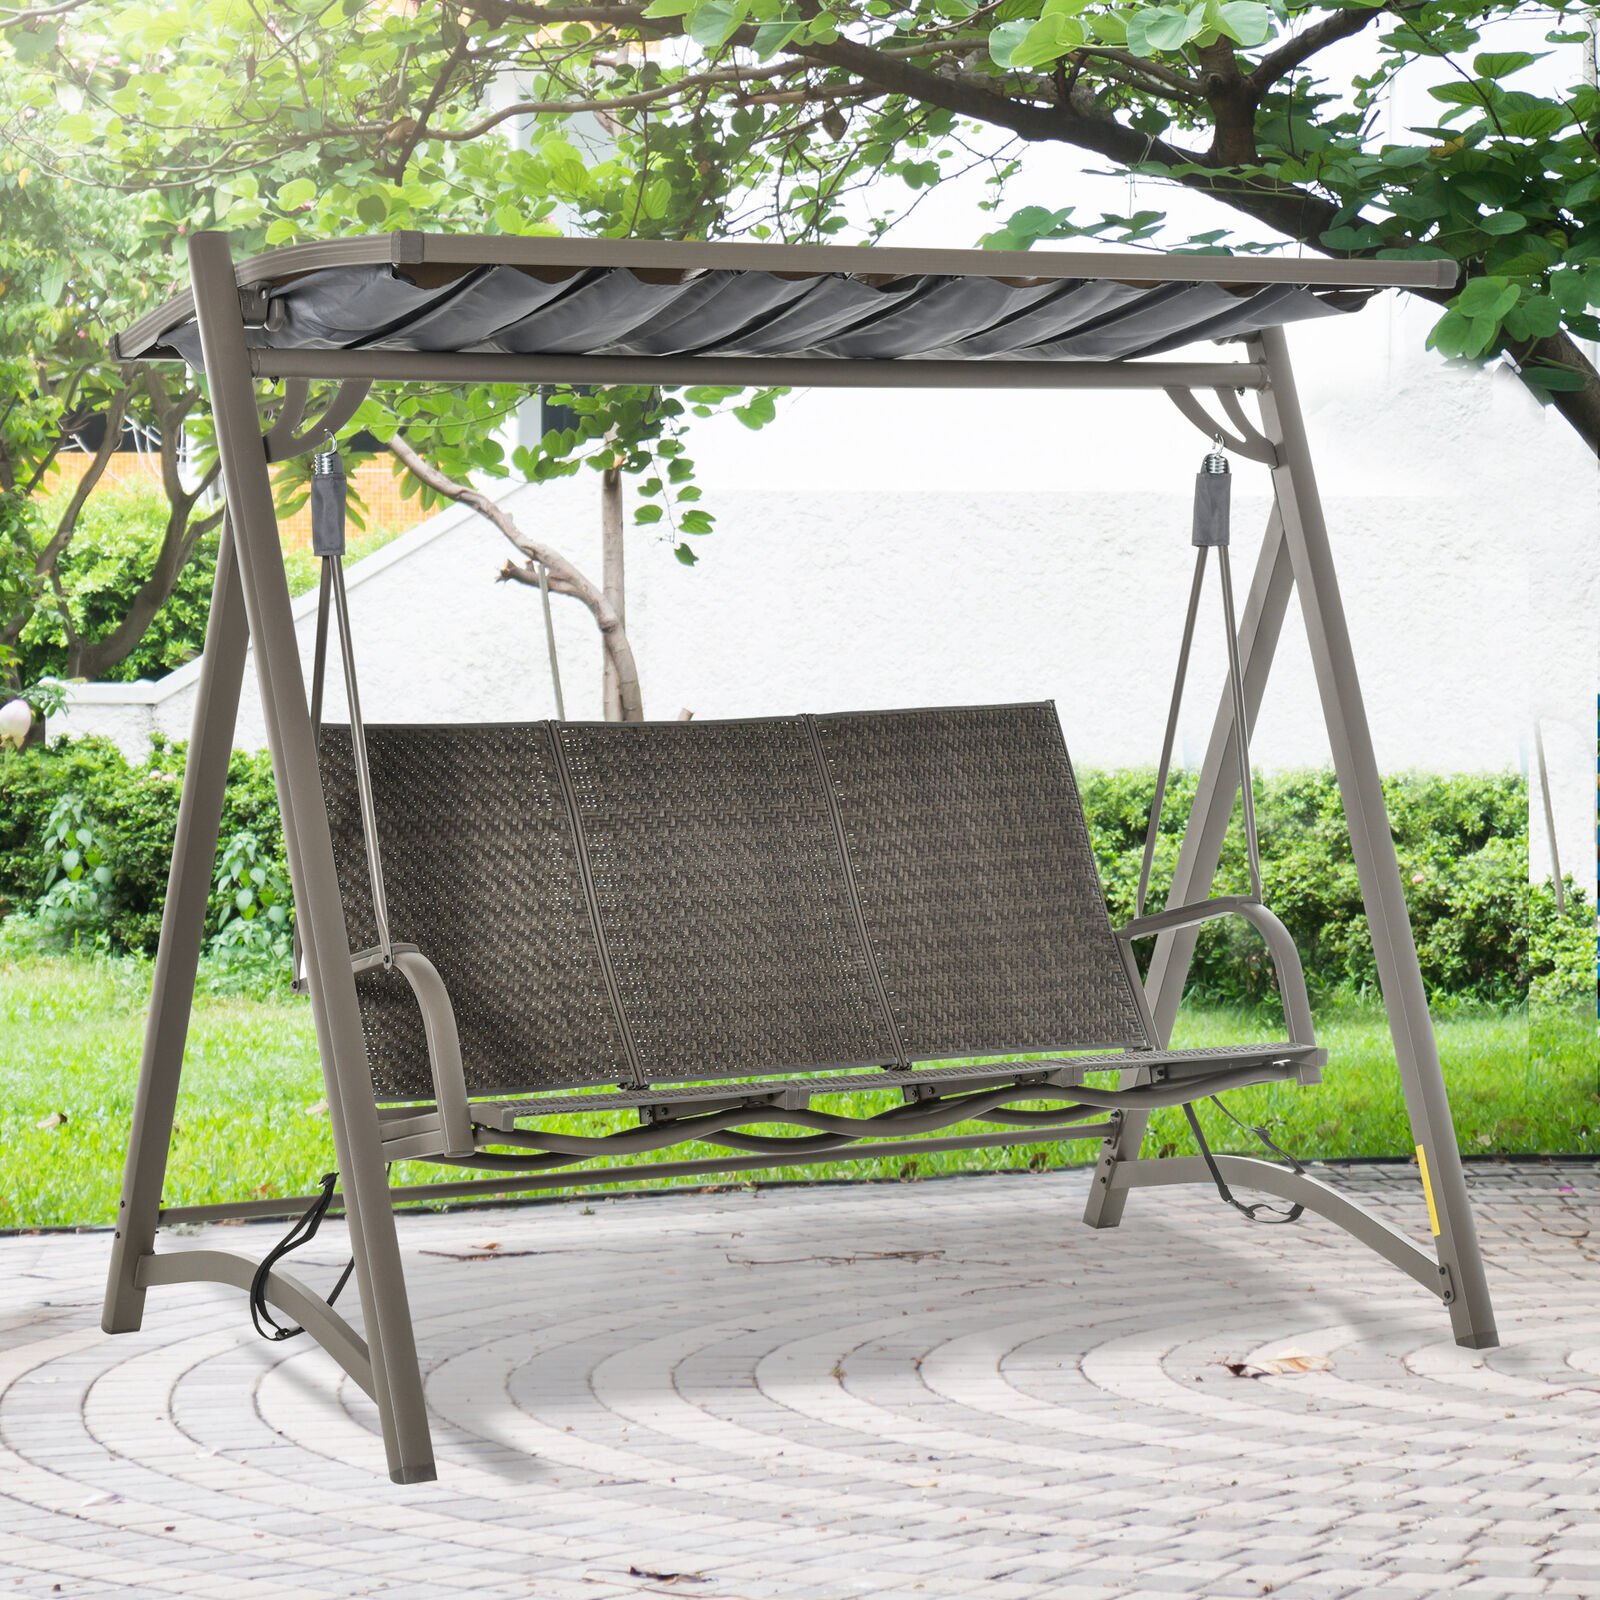 Outsunny 3 Seater Rattan Swing Chair Garden Swing Bench w/ Adjustable